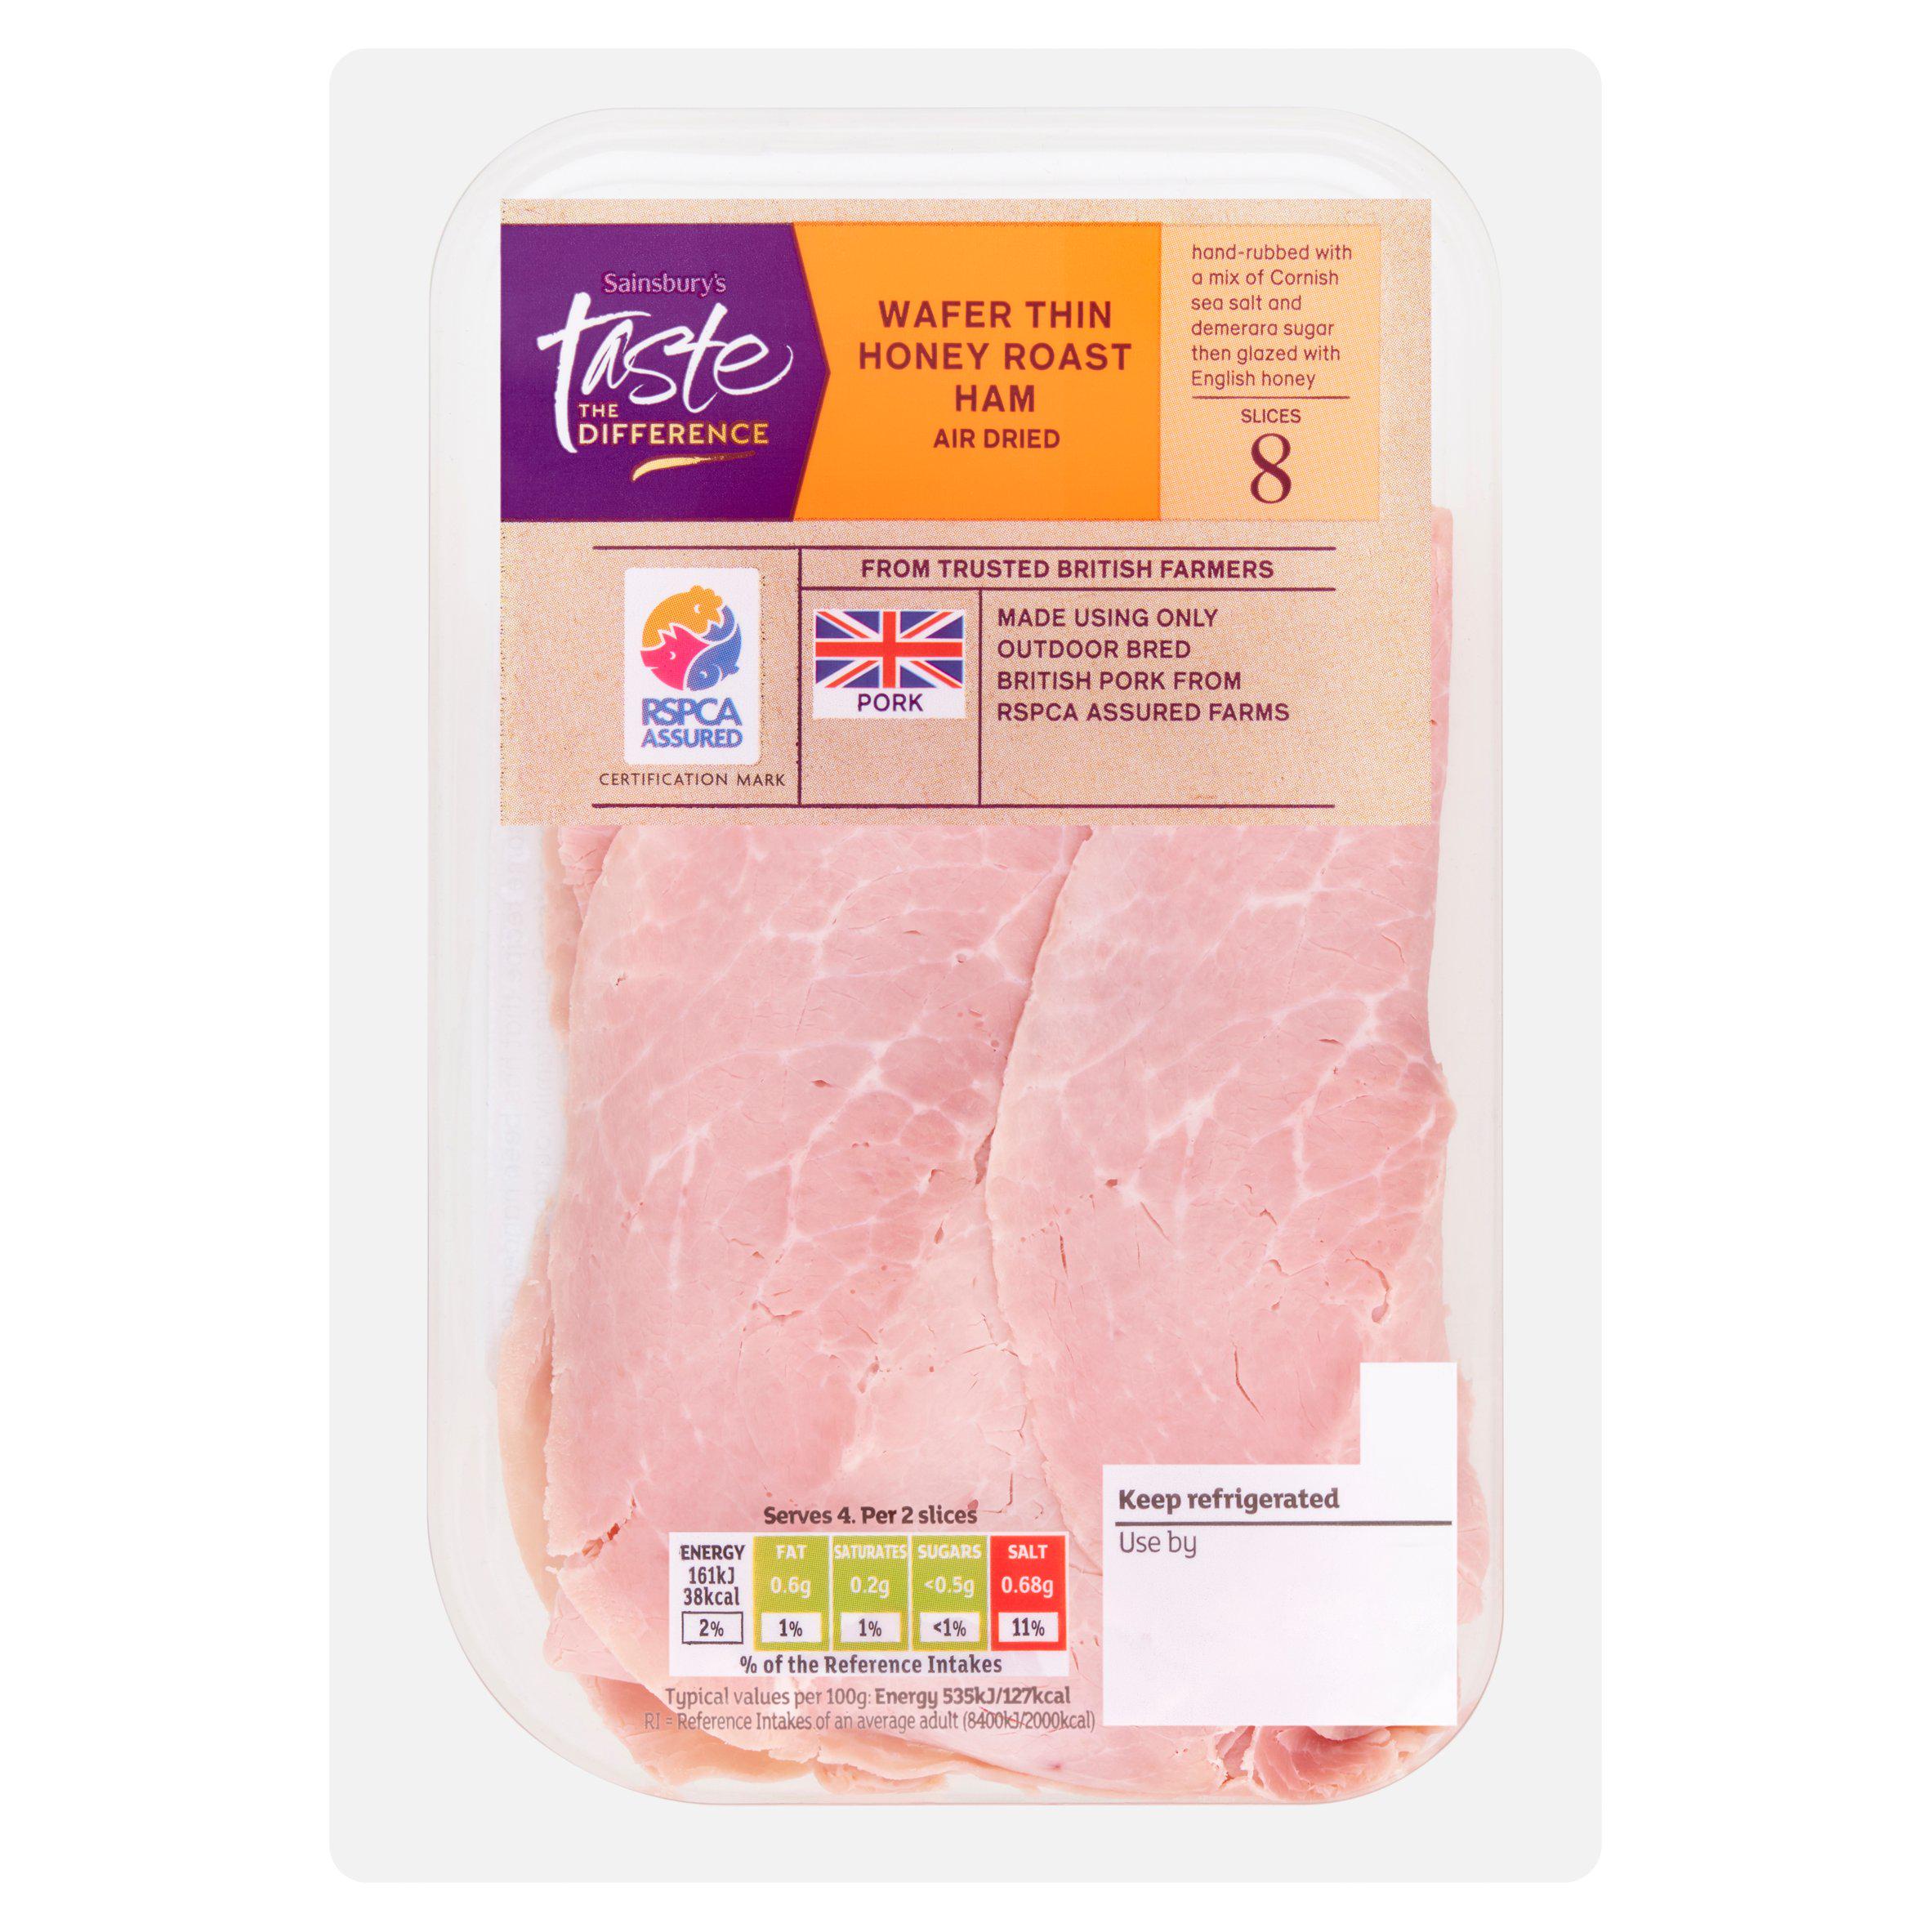 Sainsbury's Air Dried English Honey Roast Wafer Thin Lean Cooked British Ham, Taste the Difference 120g